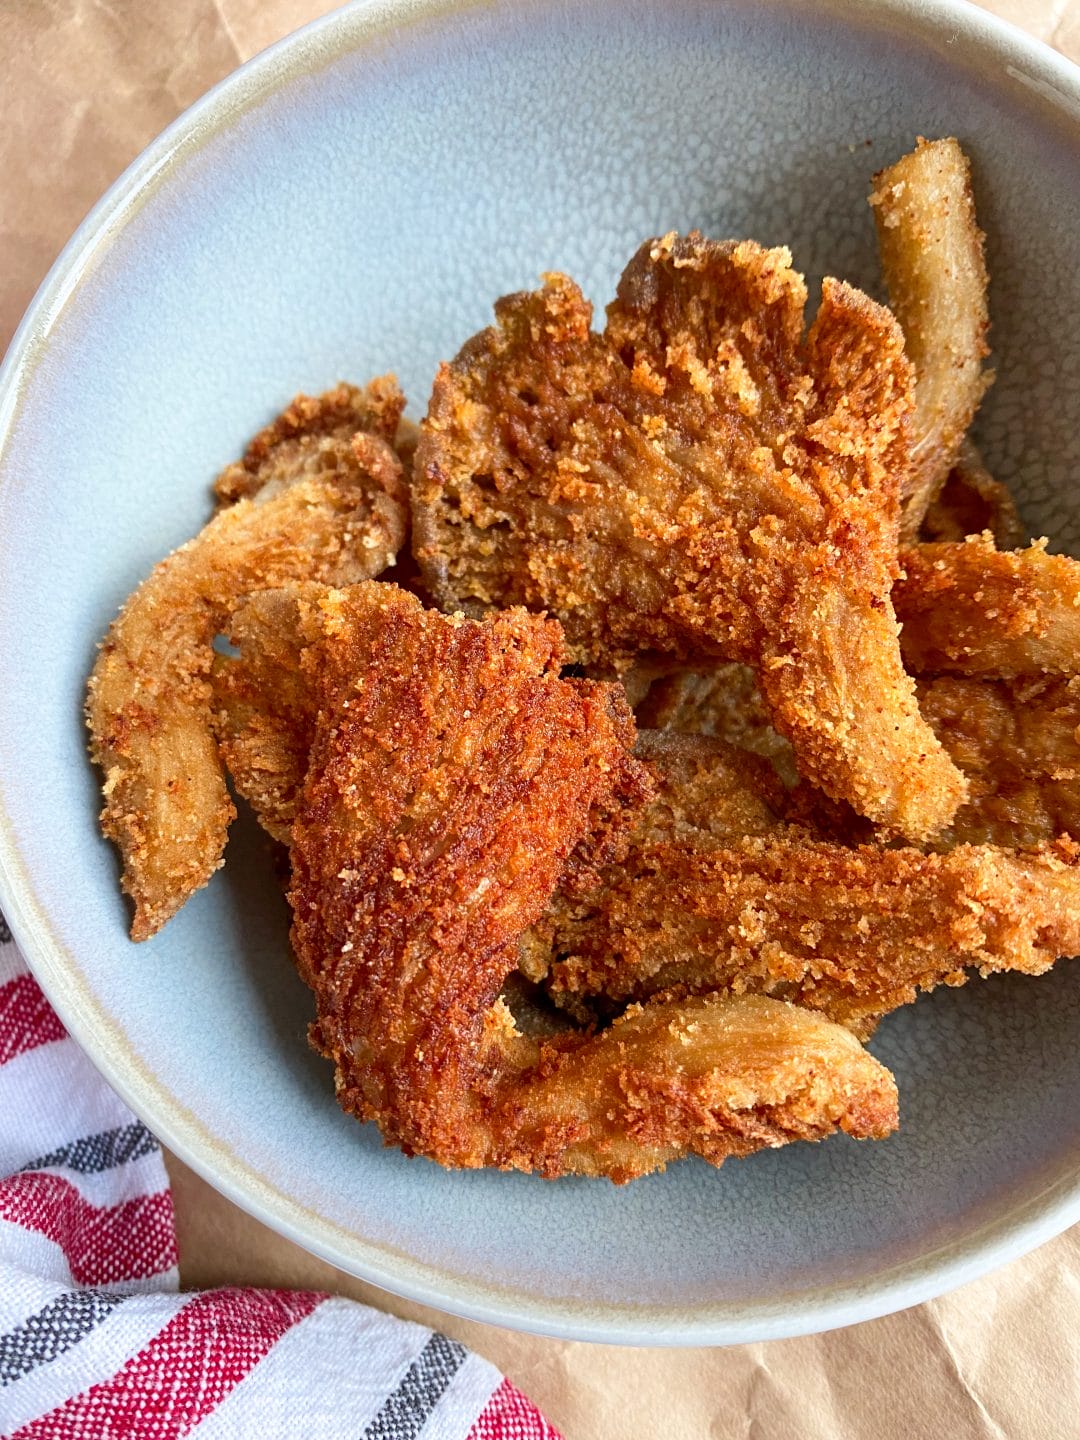 Picture of keto vegan fried chicken or keto fried oyster mushrooms